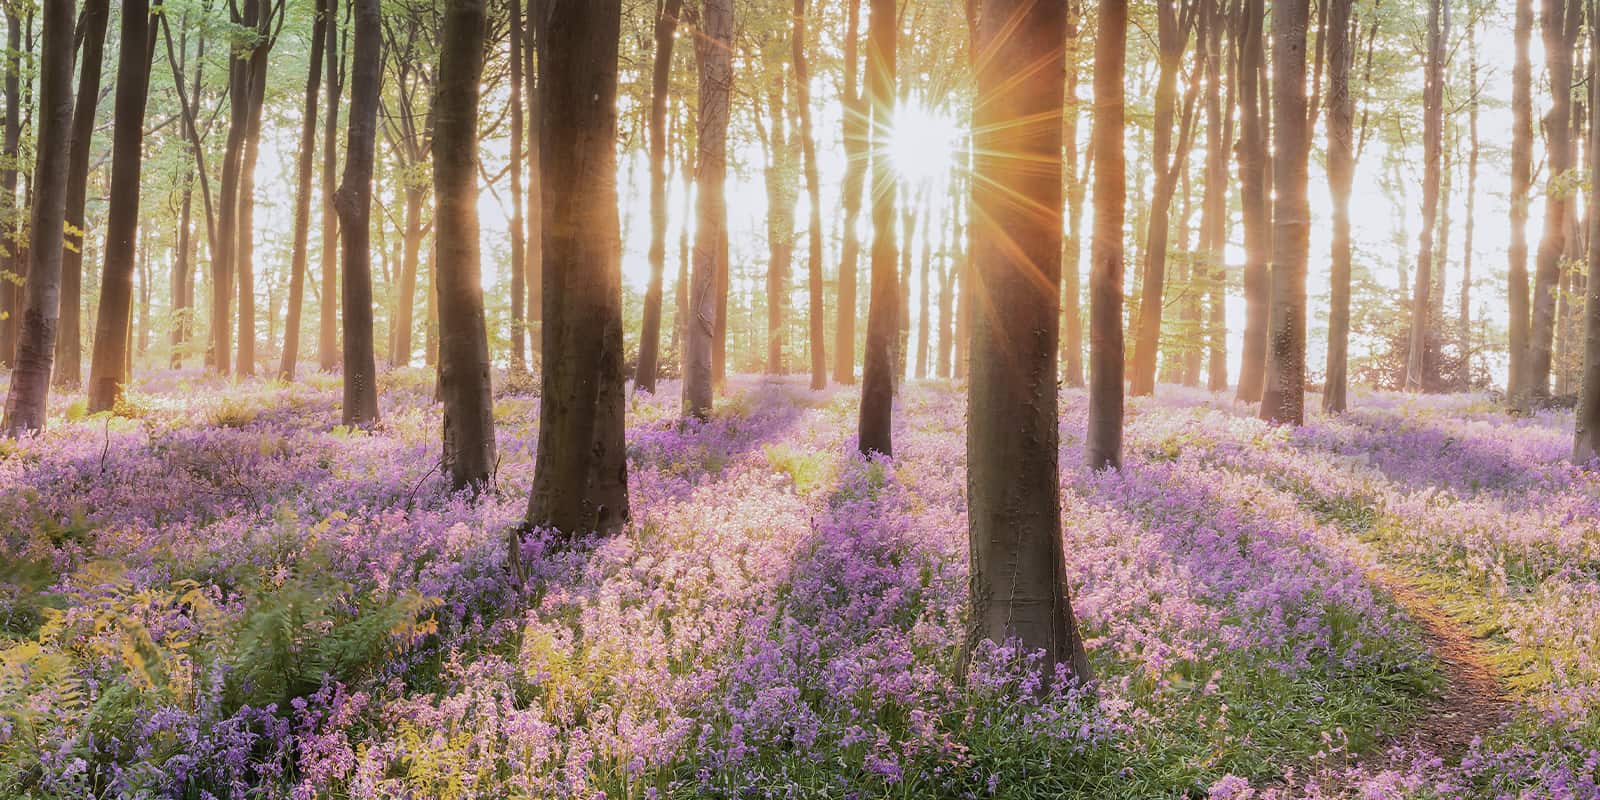 Landscape image with lots of trees with the sun shining through with the floor covered in purple flowers.